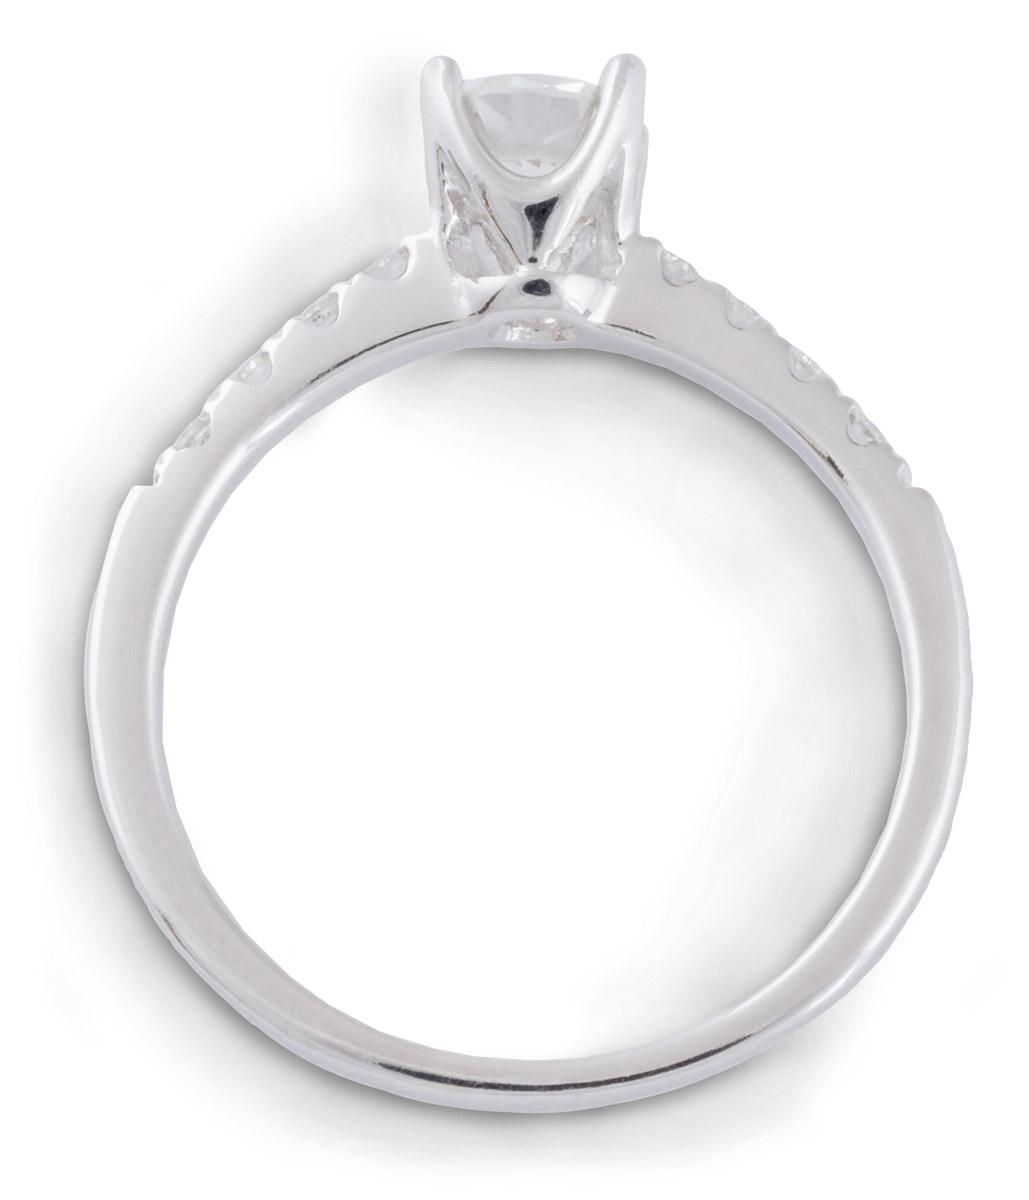 Delicate Simple Shank Engagement Ring with Diamonds - Top